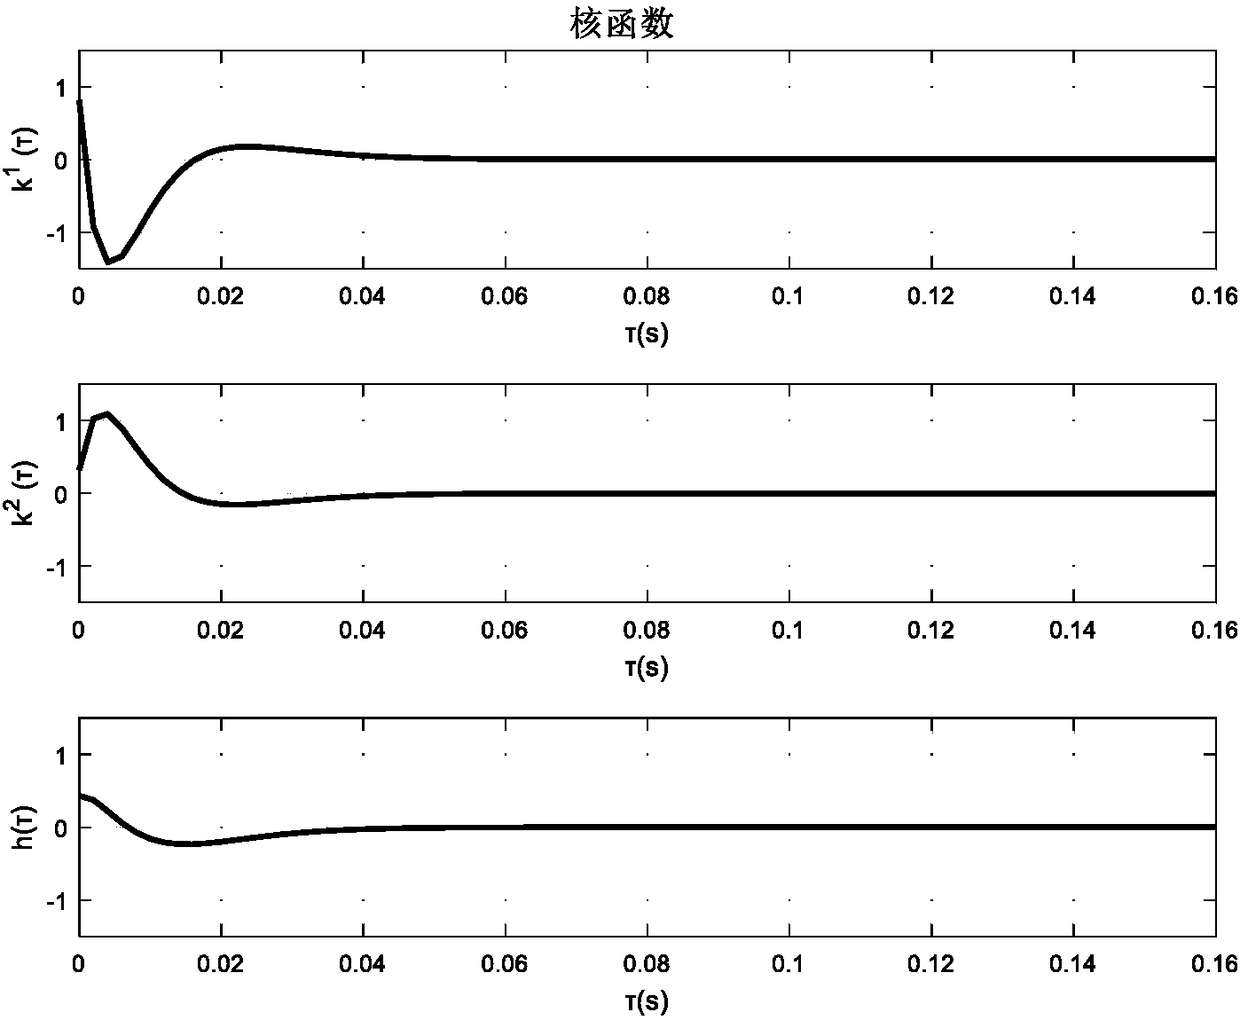 Multi-wavelet-basis function expansion-based accurate identification method of spike-potential time-varying Granger causality (GC)